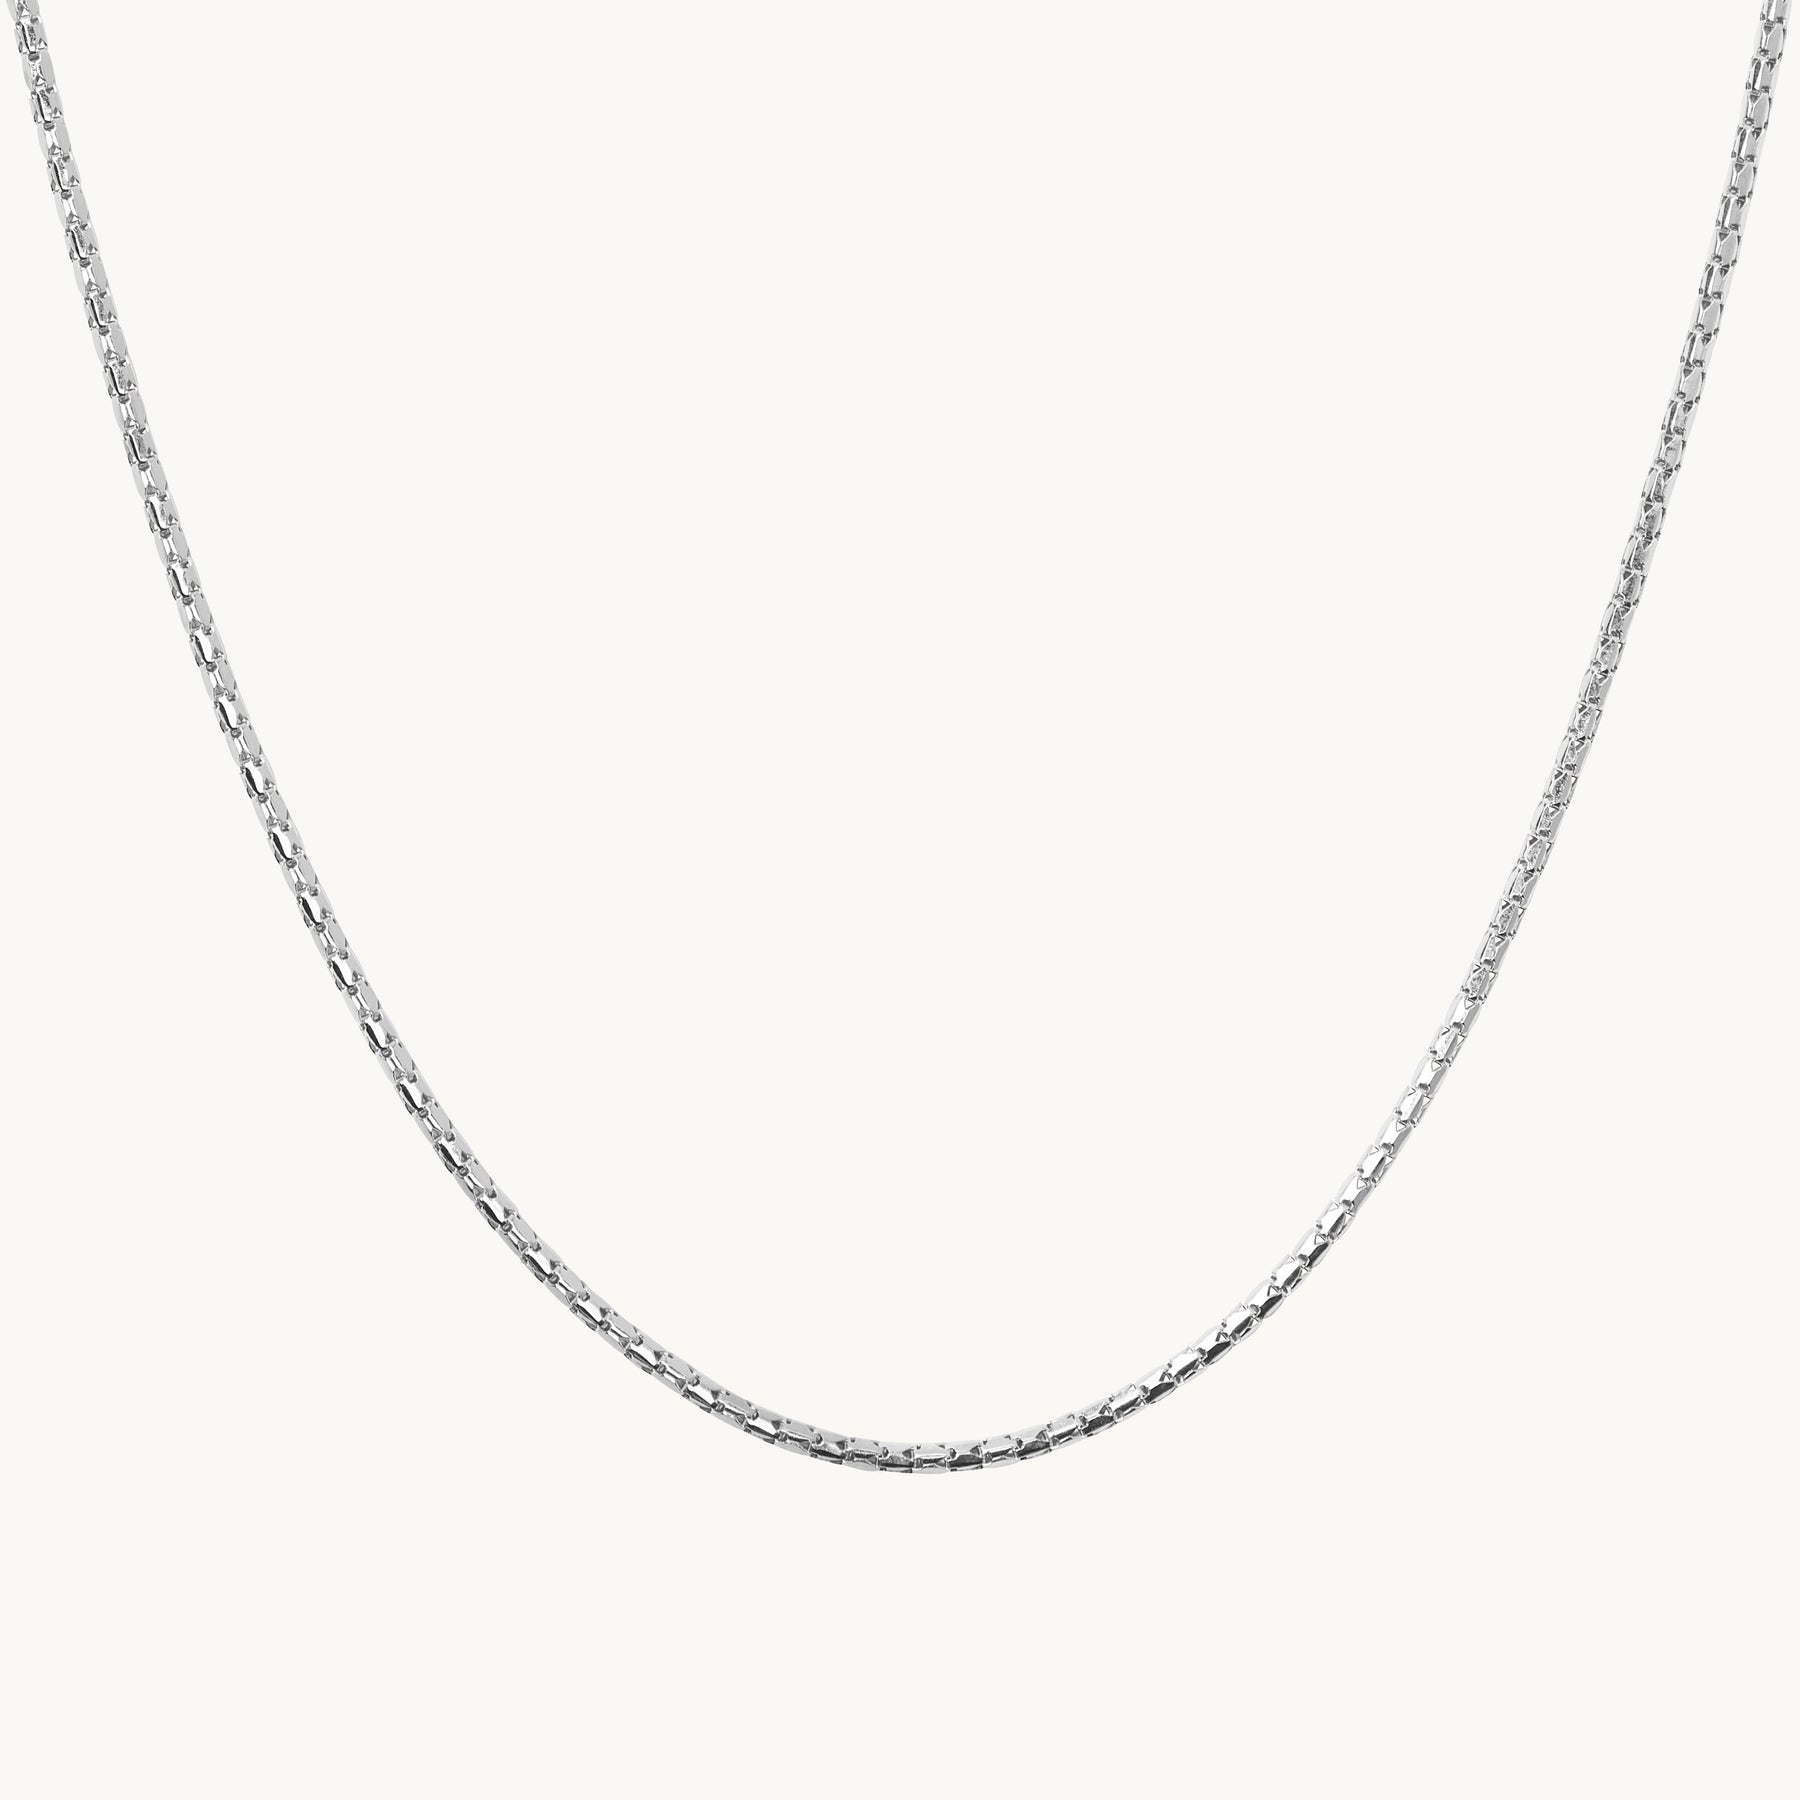 Serenity Necklace - Long